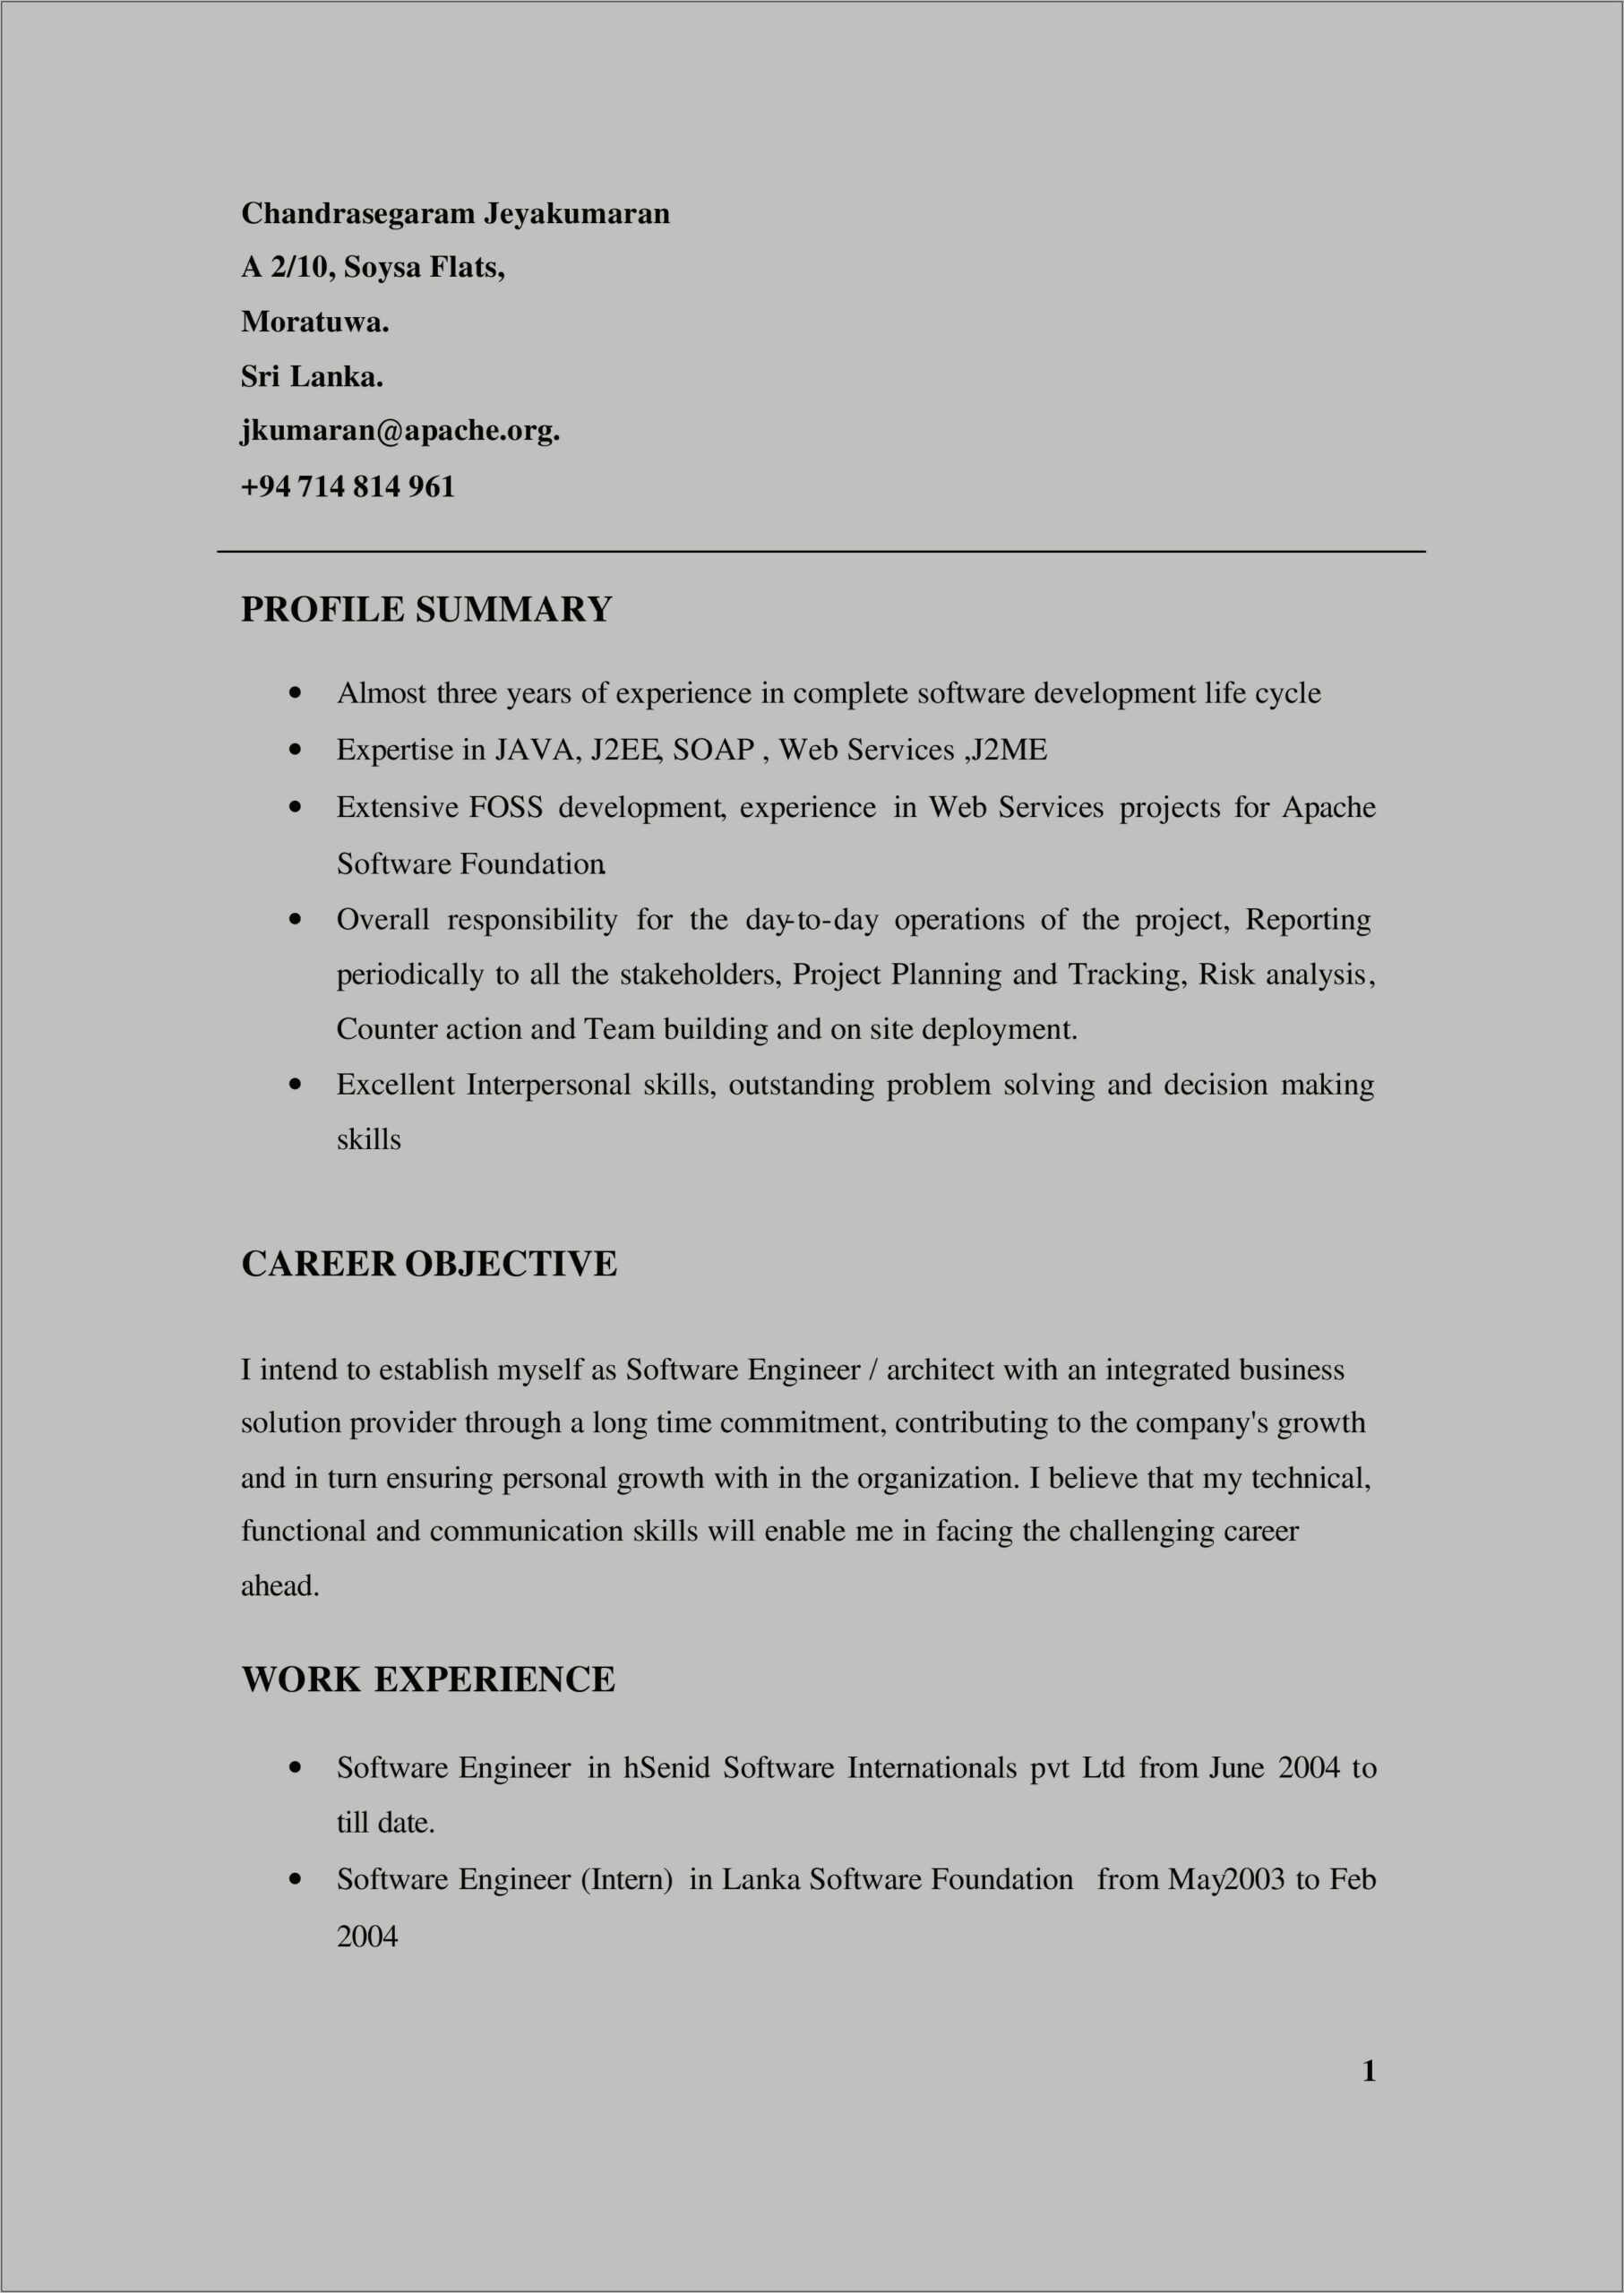 Including Location Of Experience On Resume